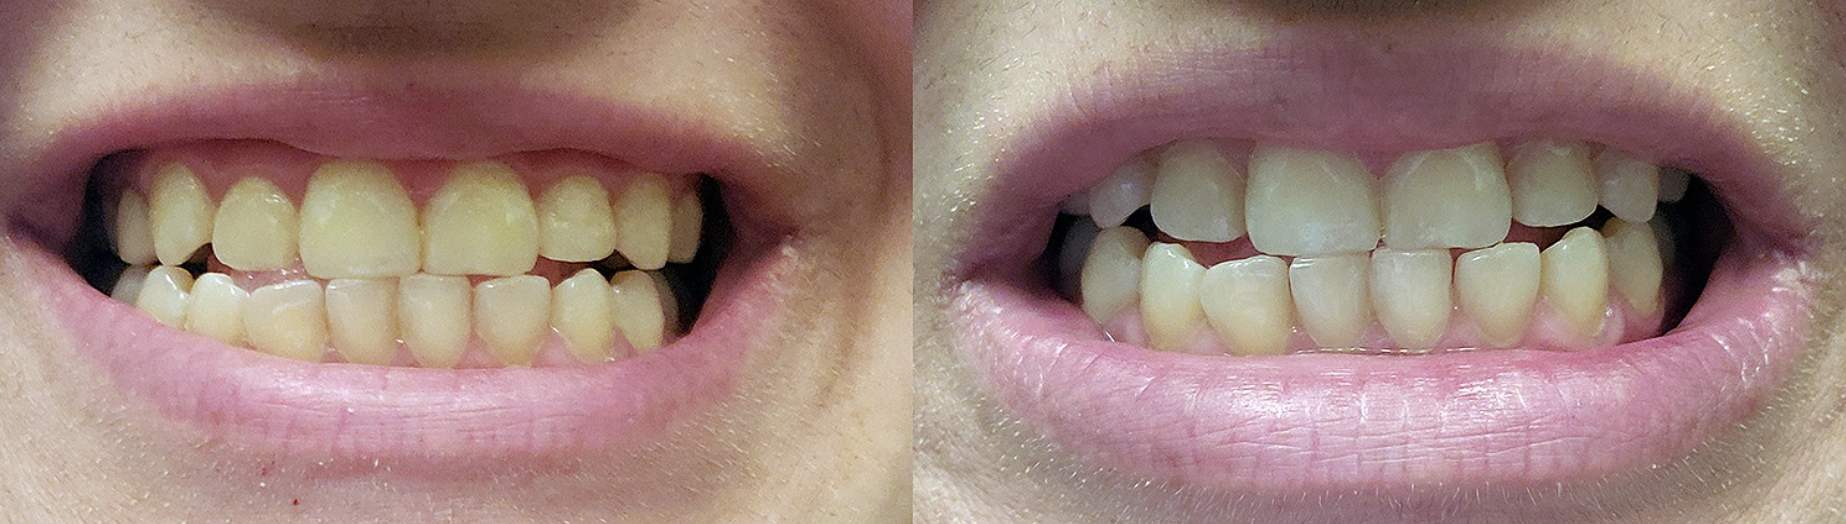 before photo of a reviewer&#x27;s yellow teeth and after photo showing the pen significantly brightened their teeth